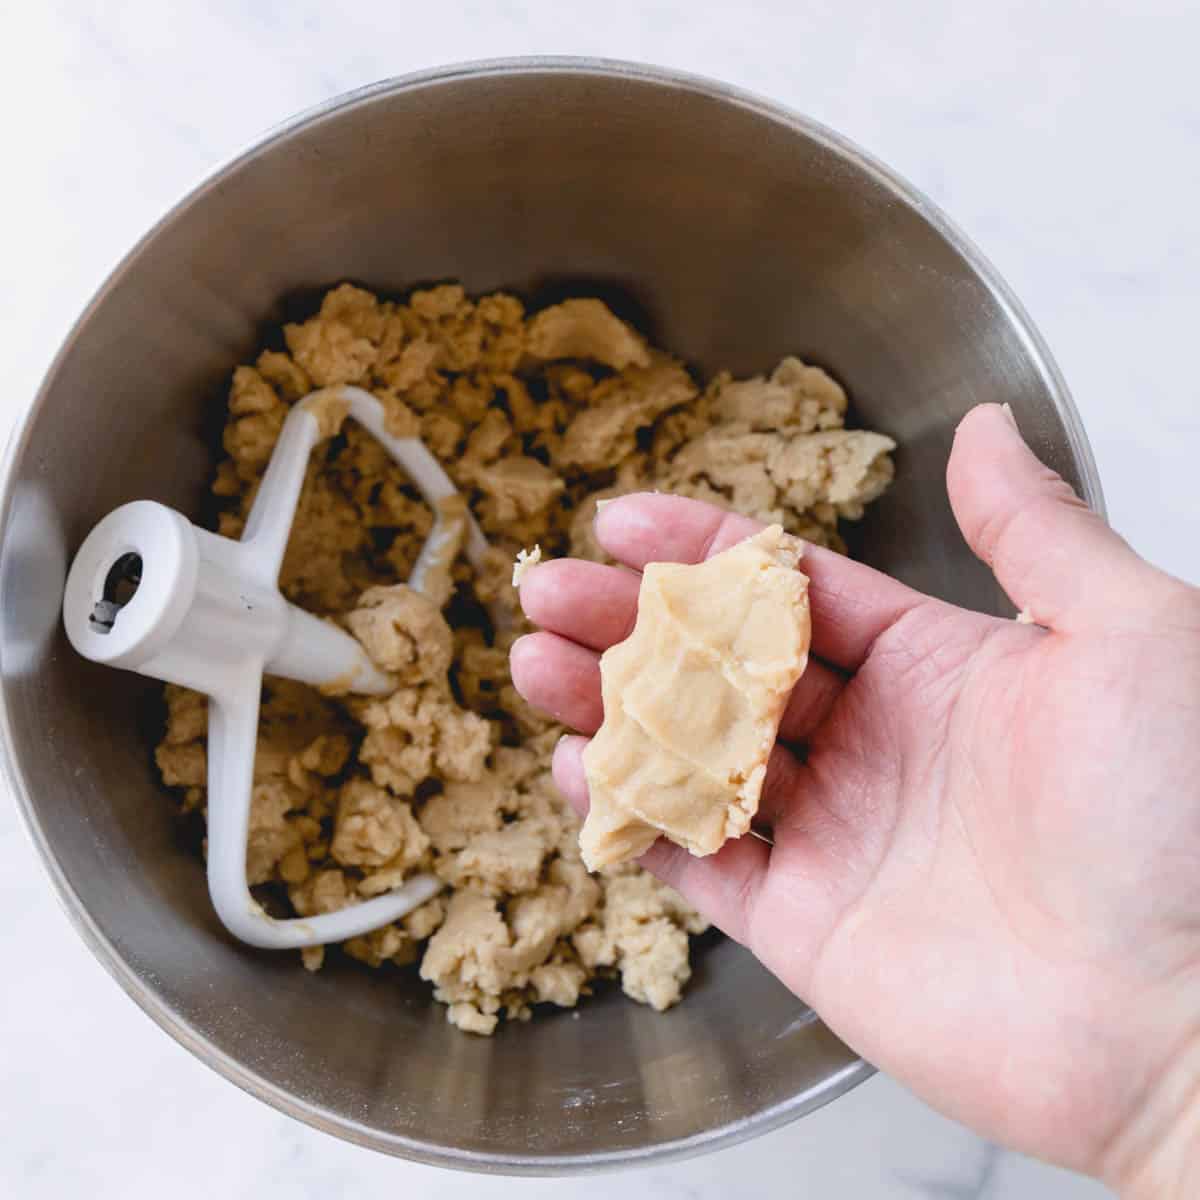 Crumbly cookie dough in a mixing bowl and some squeezed in hand.